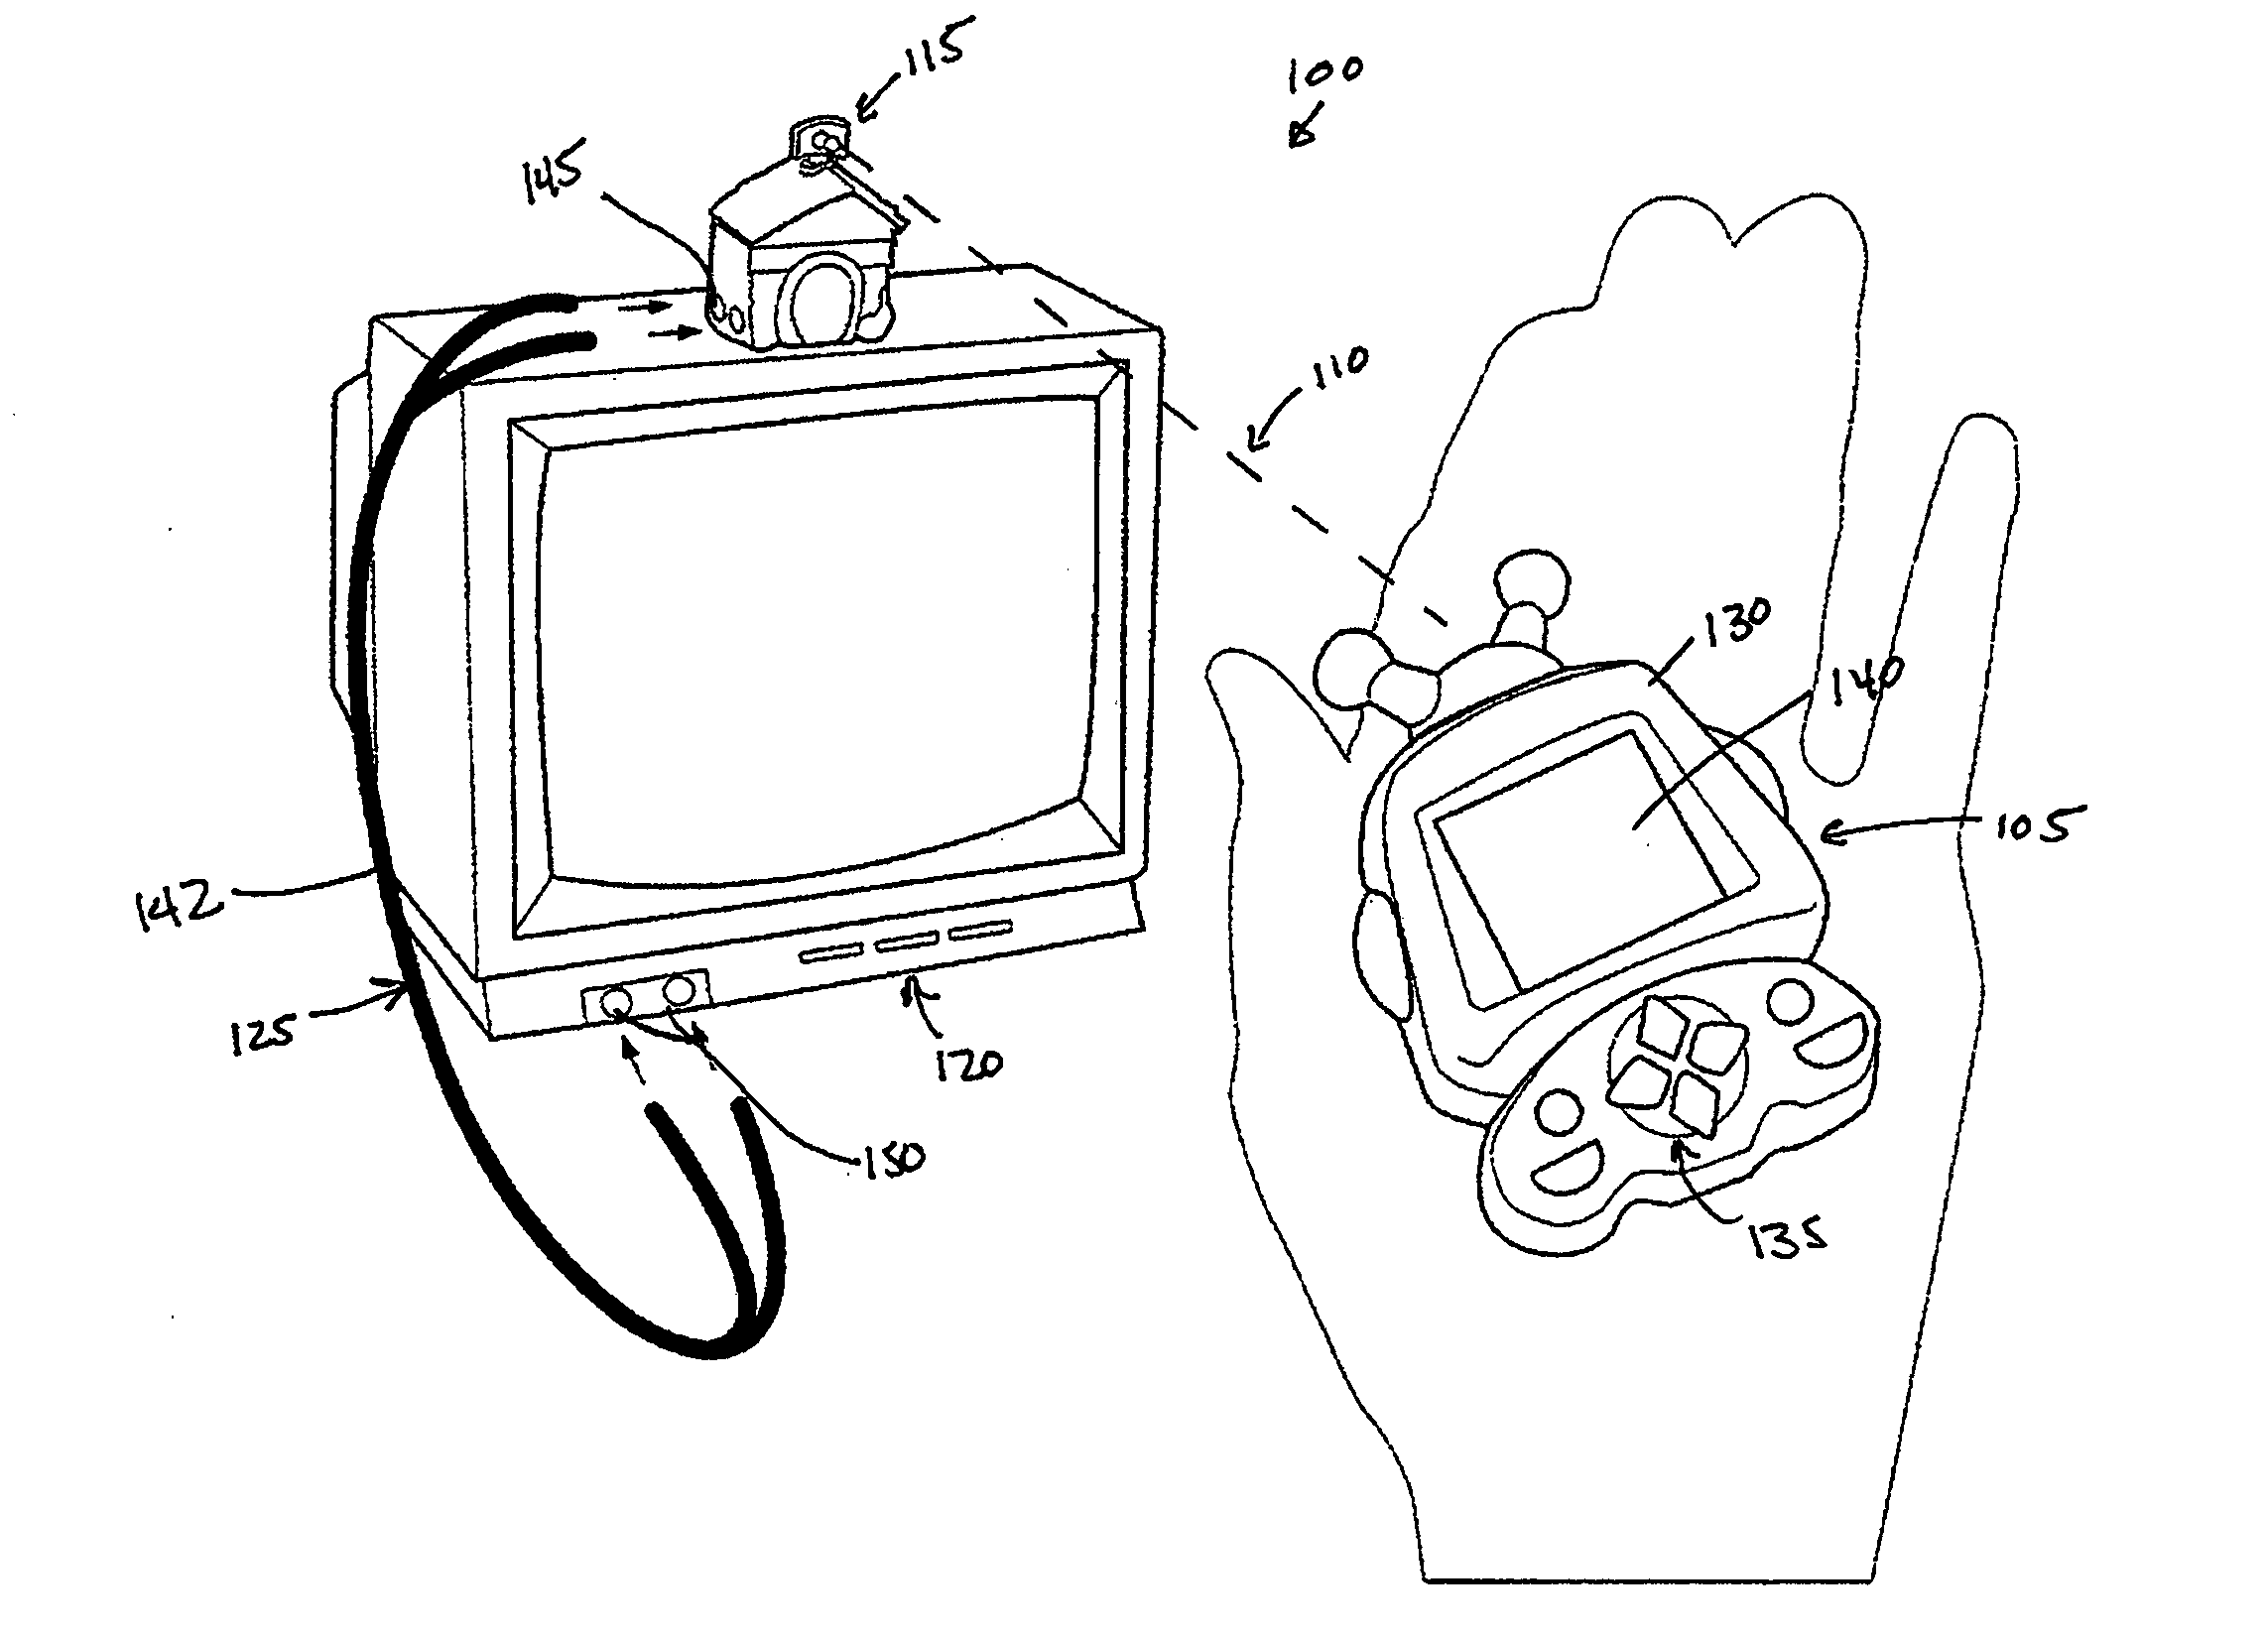 Portable hand-held entertainment system with connectivity to non-integrated displays